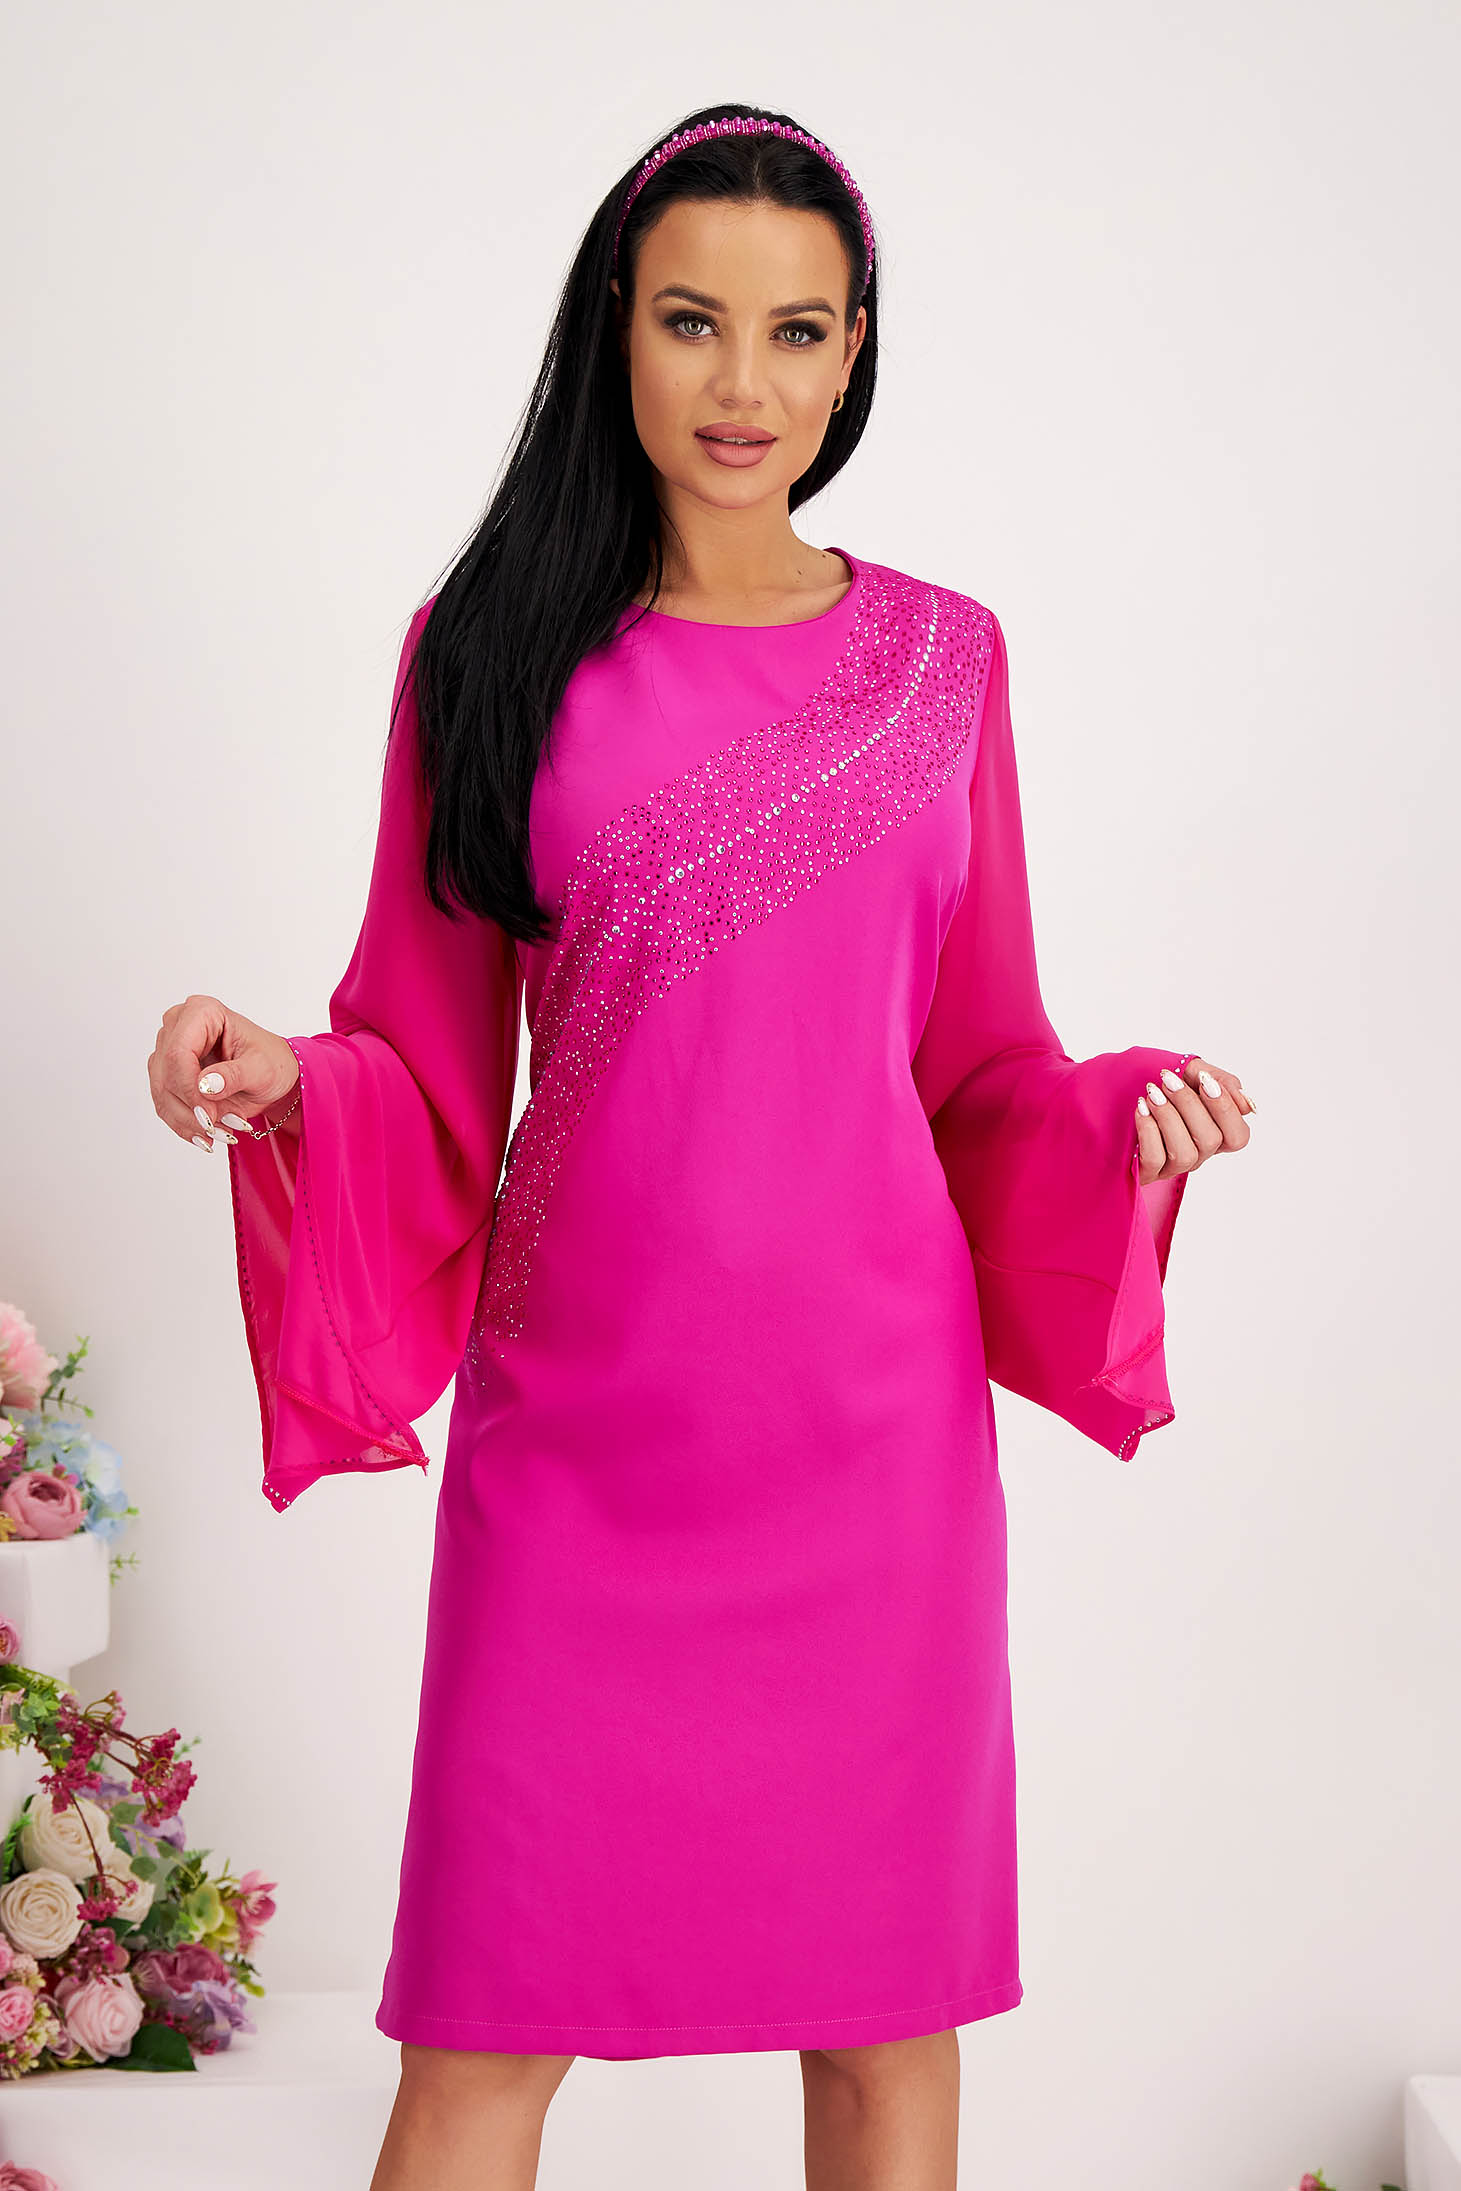 Fuchsia dress elastic cloth pencil with veil sleeves with butterfly sleeves with crystal embellished details